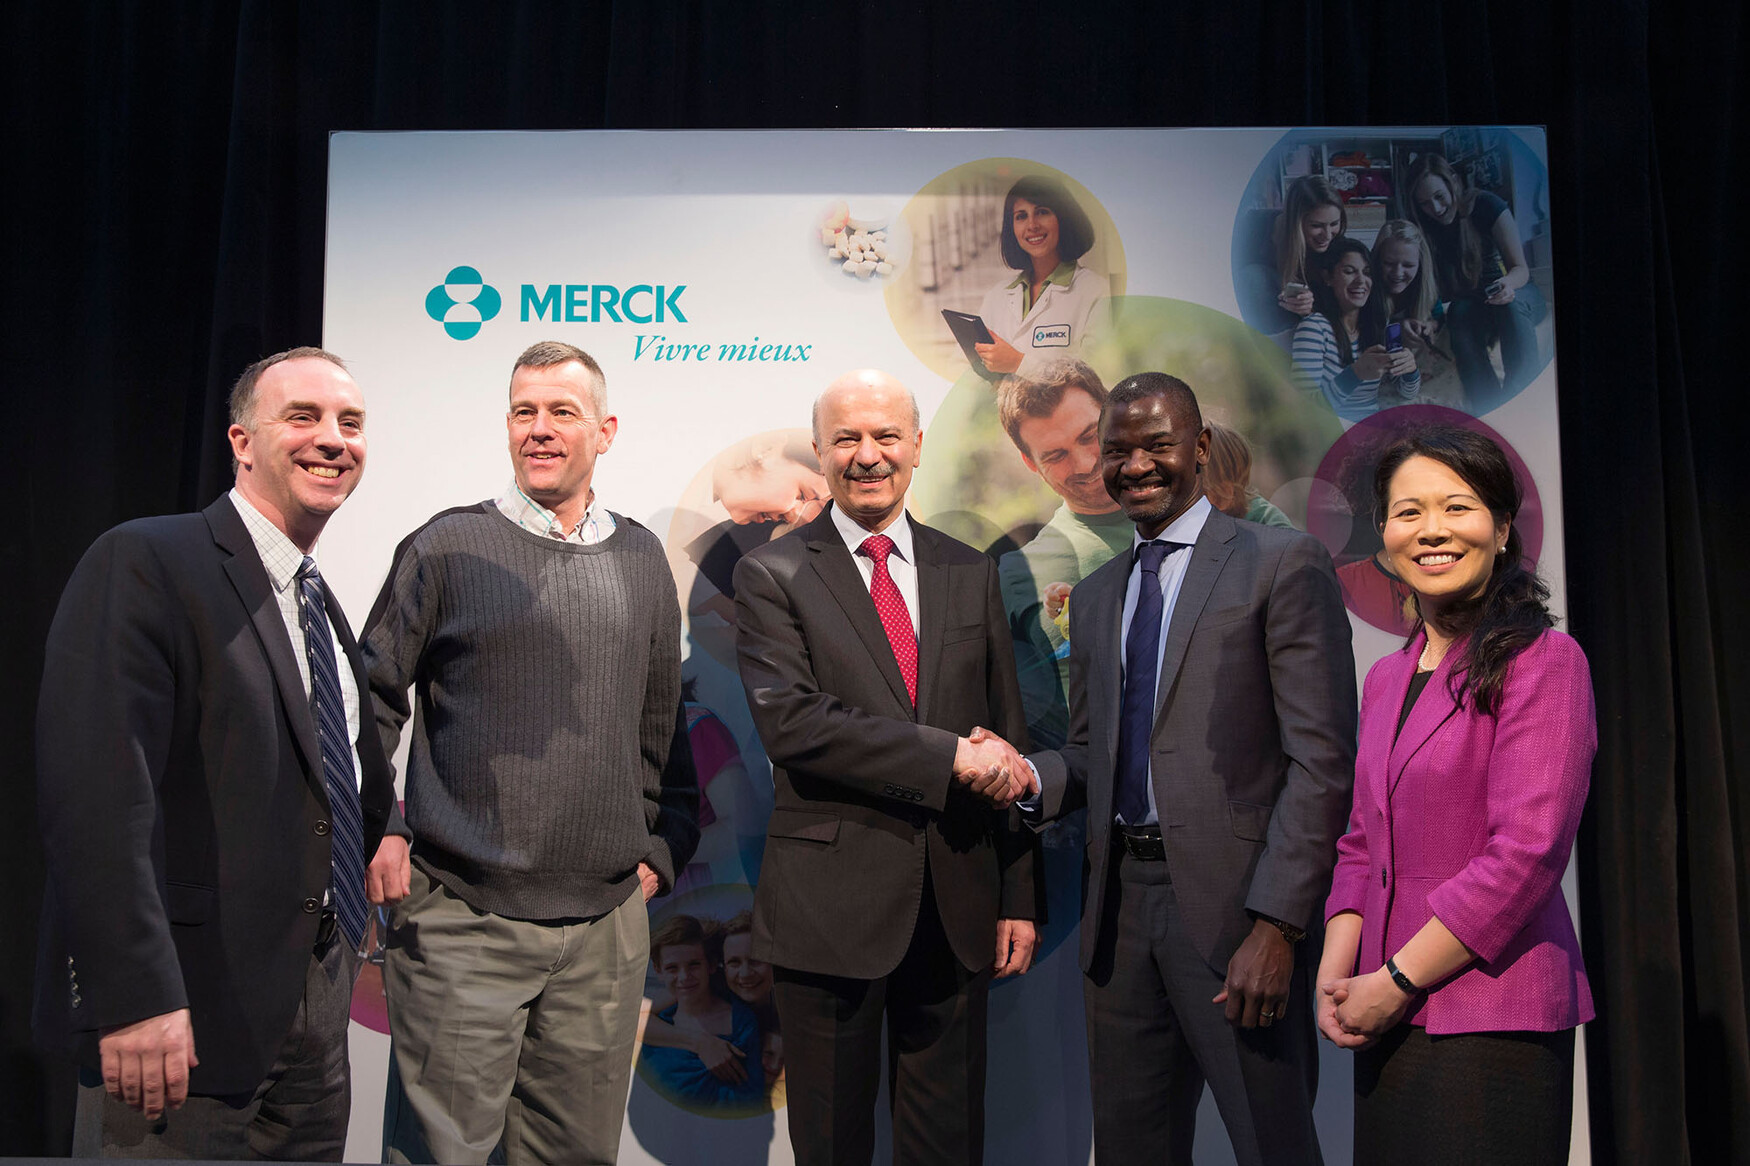 From left to right: Dr. Ronan O'Hagan, Dr. Aled Edwards, The Honourable Reza Moridi, Mr. Chirfi Guindo and Ms. Jennifer Chan.